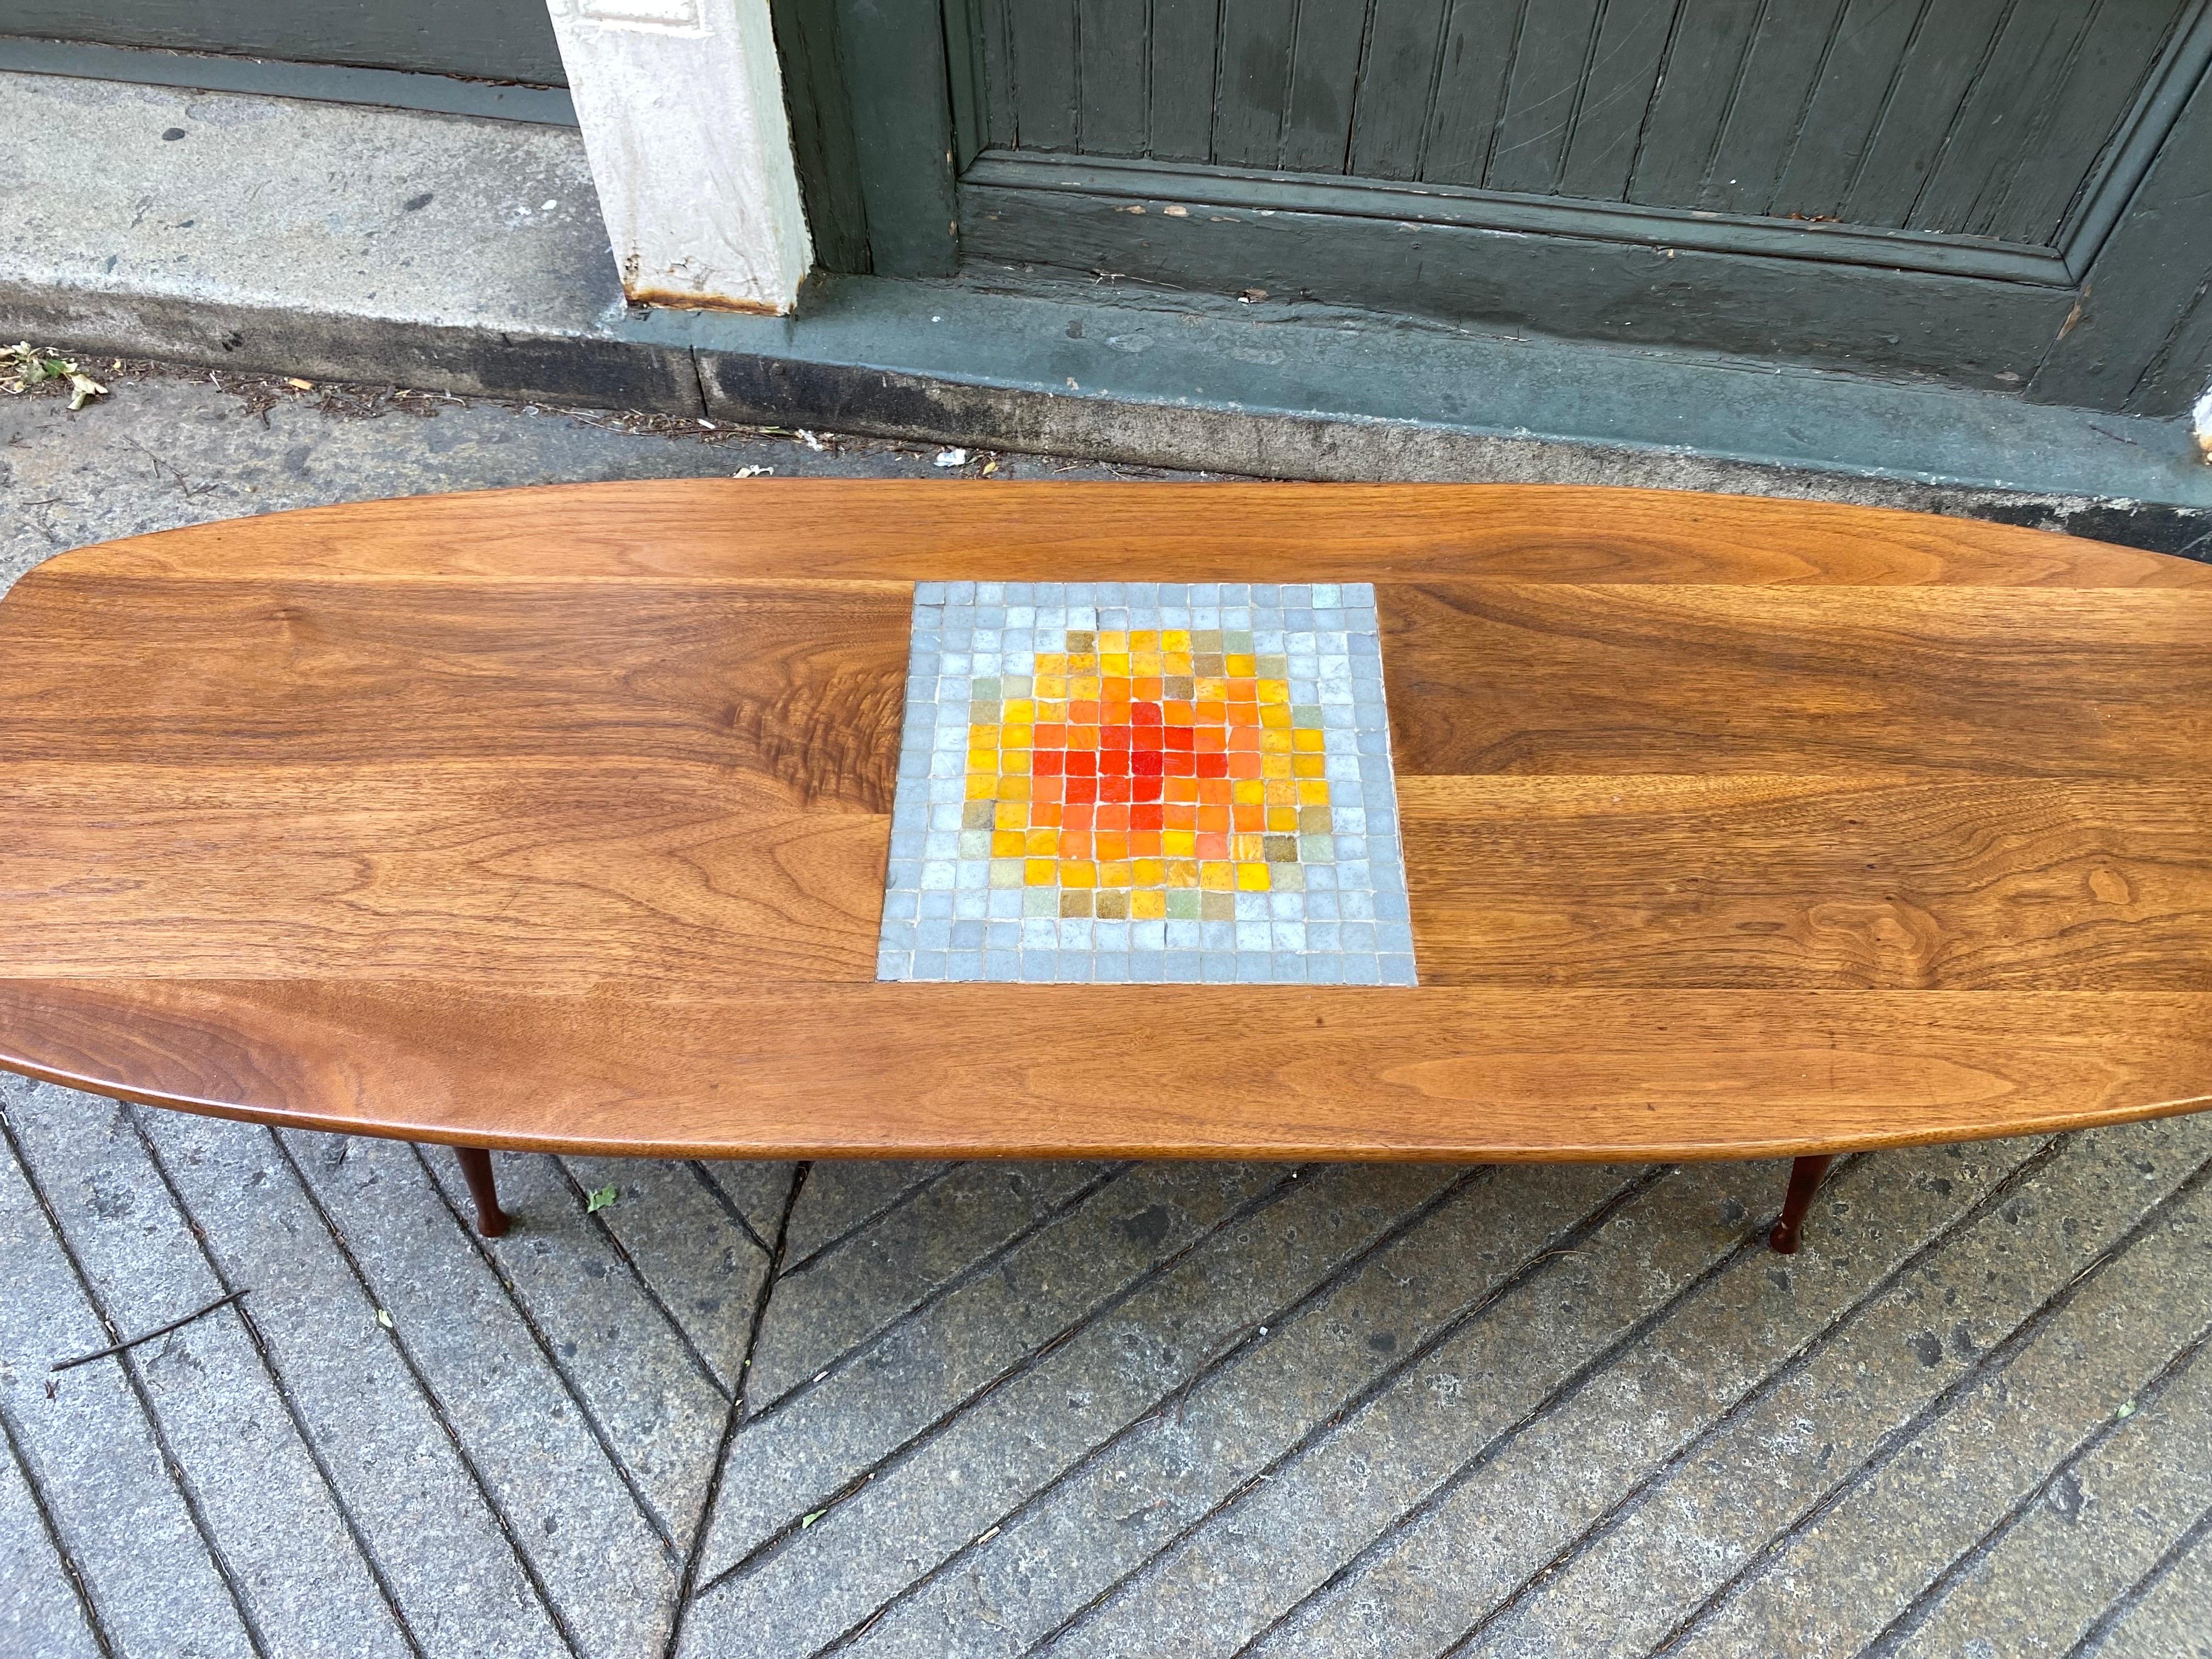 Walnut Boat Shaped Coffee Table with italian glass tiles in the center. Nice burst of color and texture. Very nice smaller scale. Legs unscrew for easy transporting!